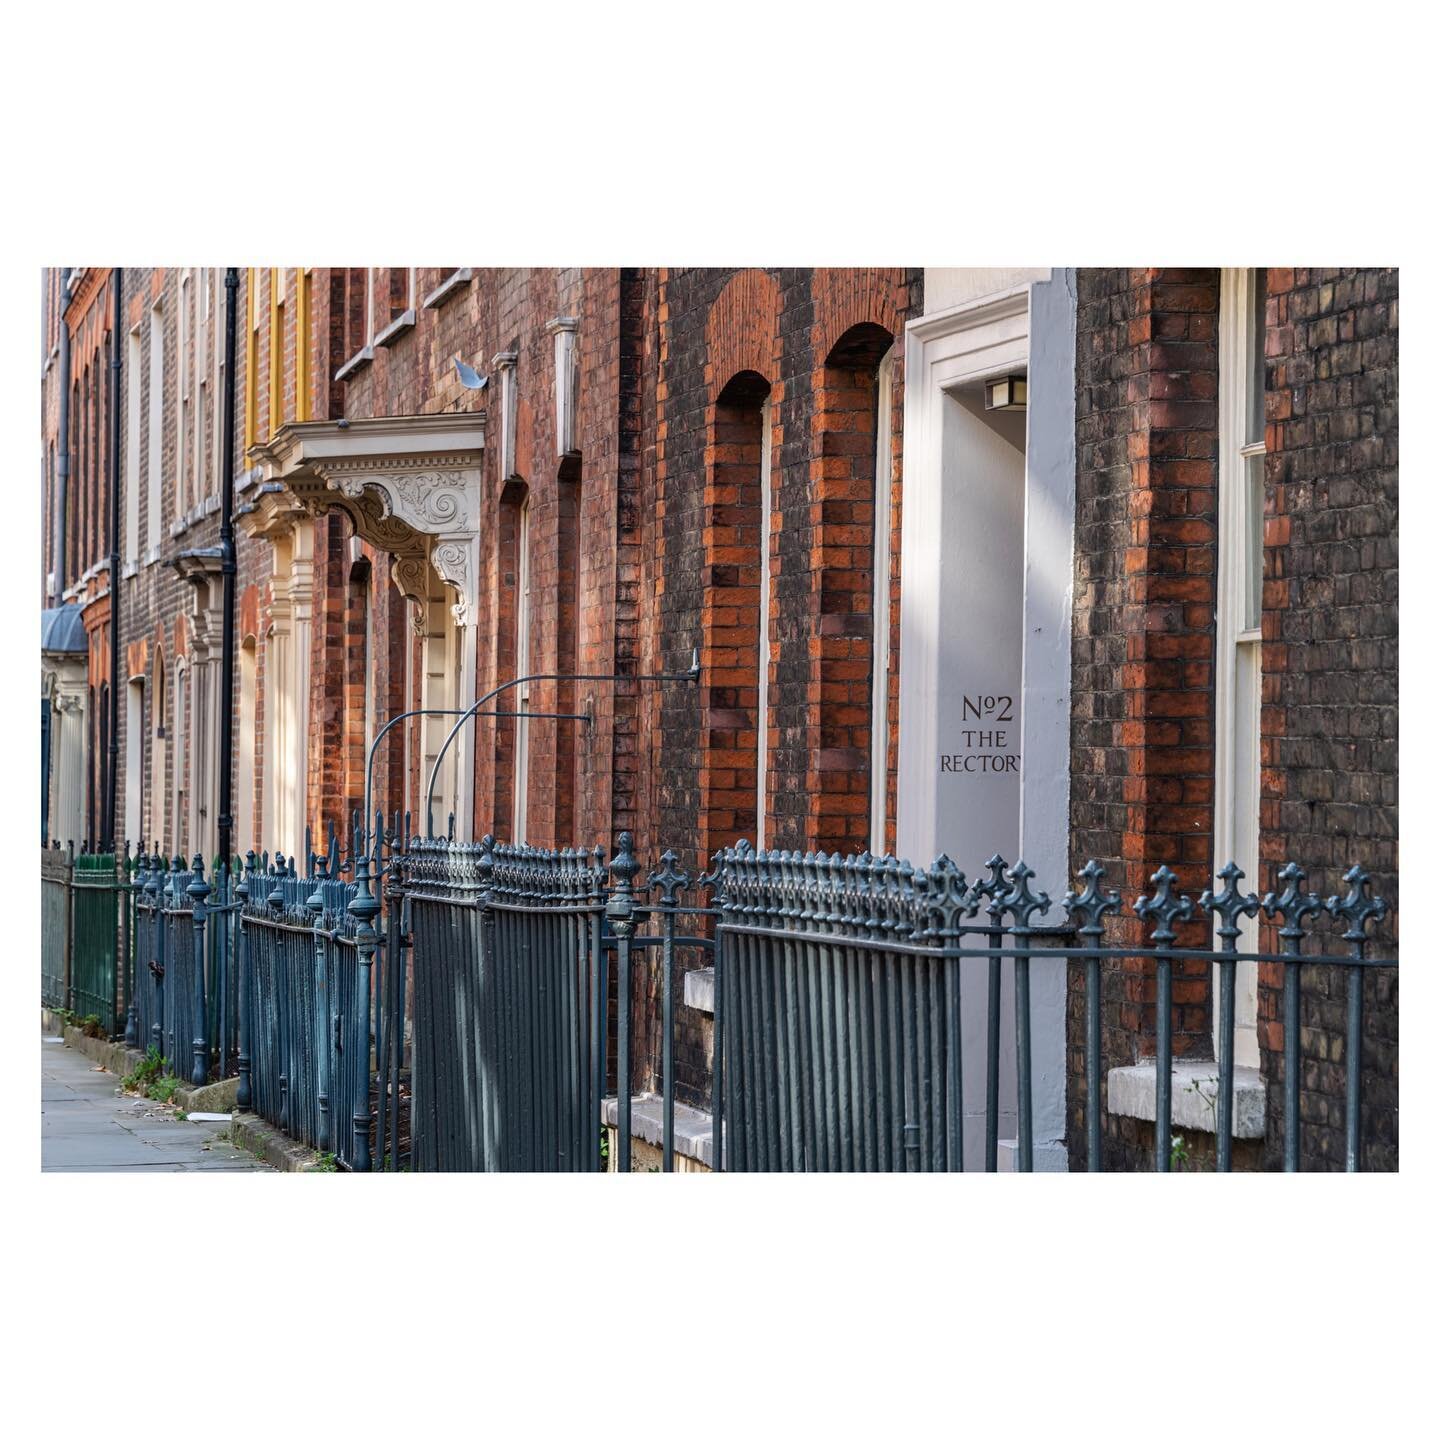 Step back to the 1720s with a stroll down Fournier St E1, beautifully preserved early Georgian townhouses, once home to Huguenot silk weavers from France.
.
.
.
.
.
.
.
.
#fournierstreet #georgianarchitecture #london🇬🇧 #architecturalphotography #st